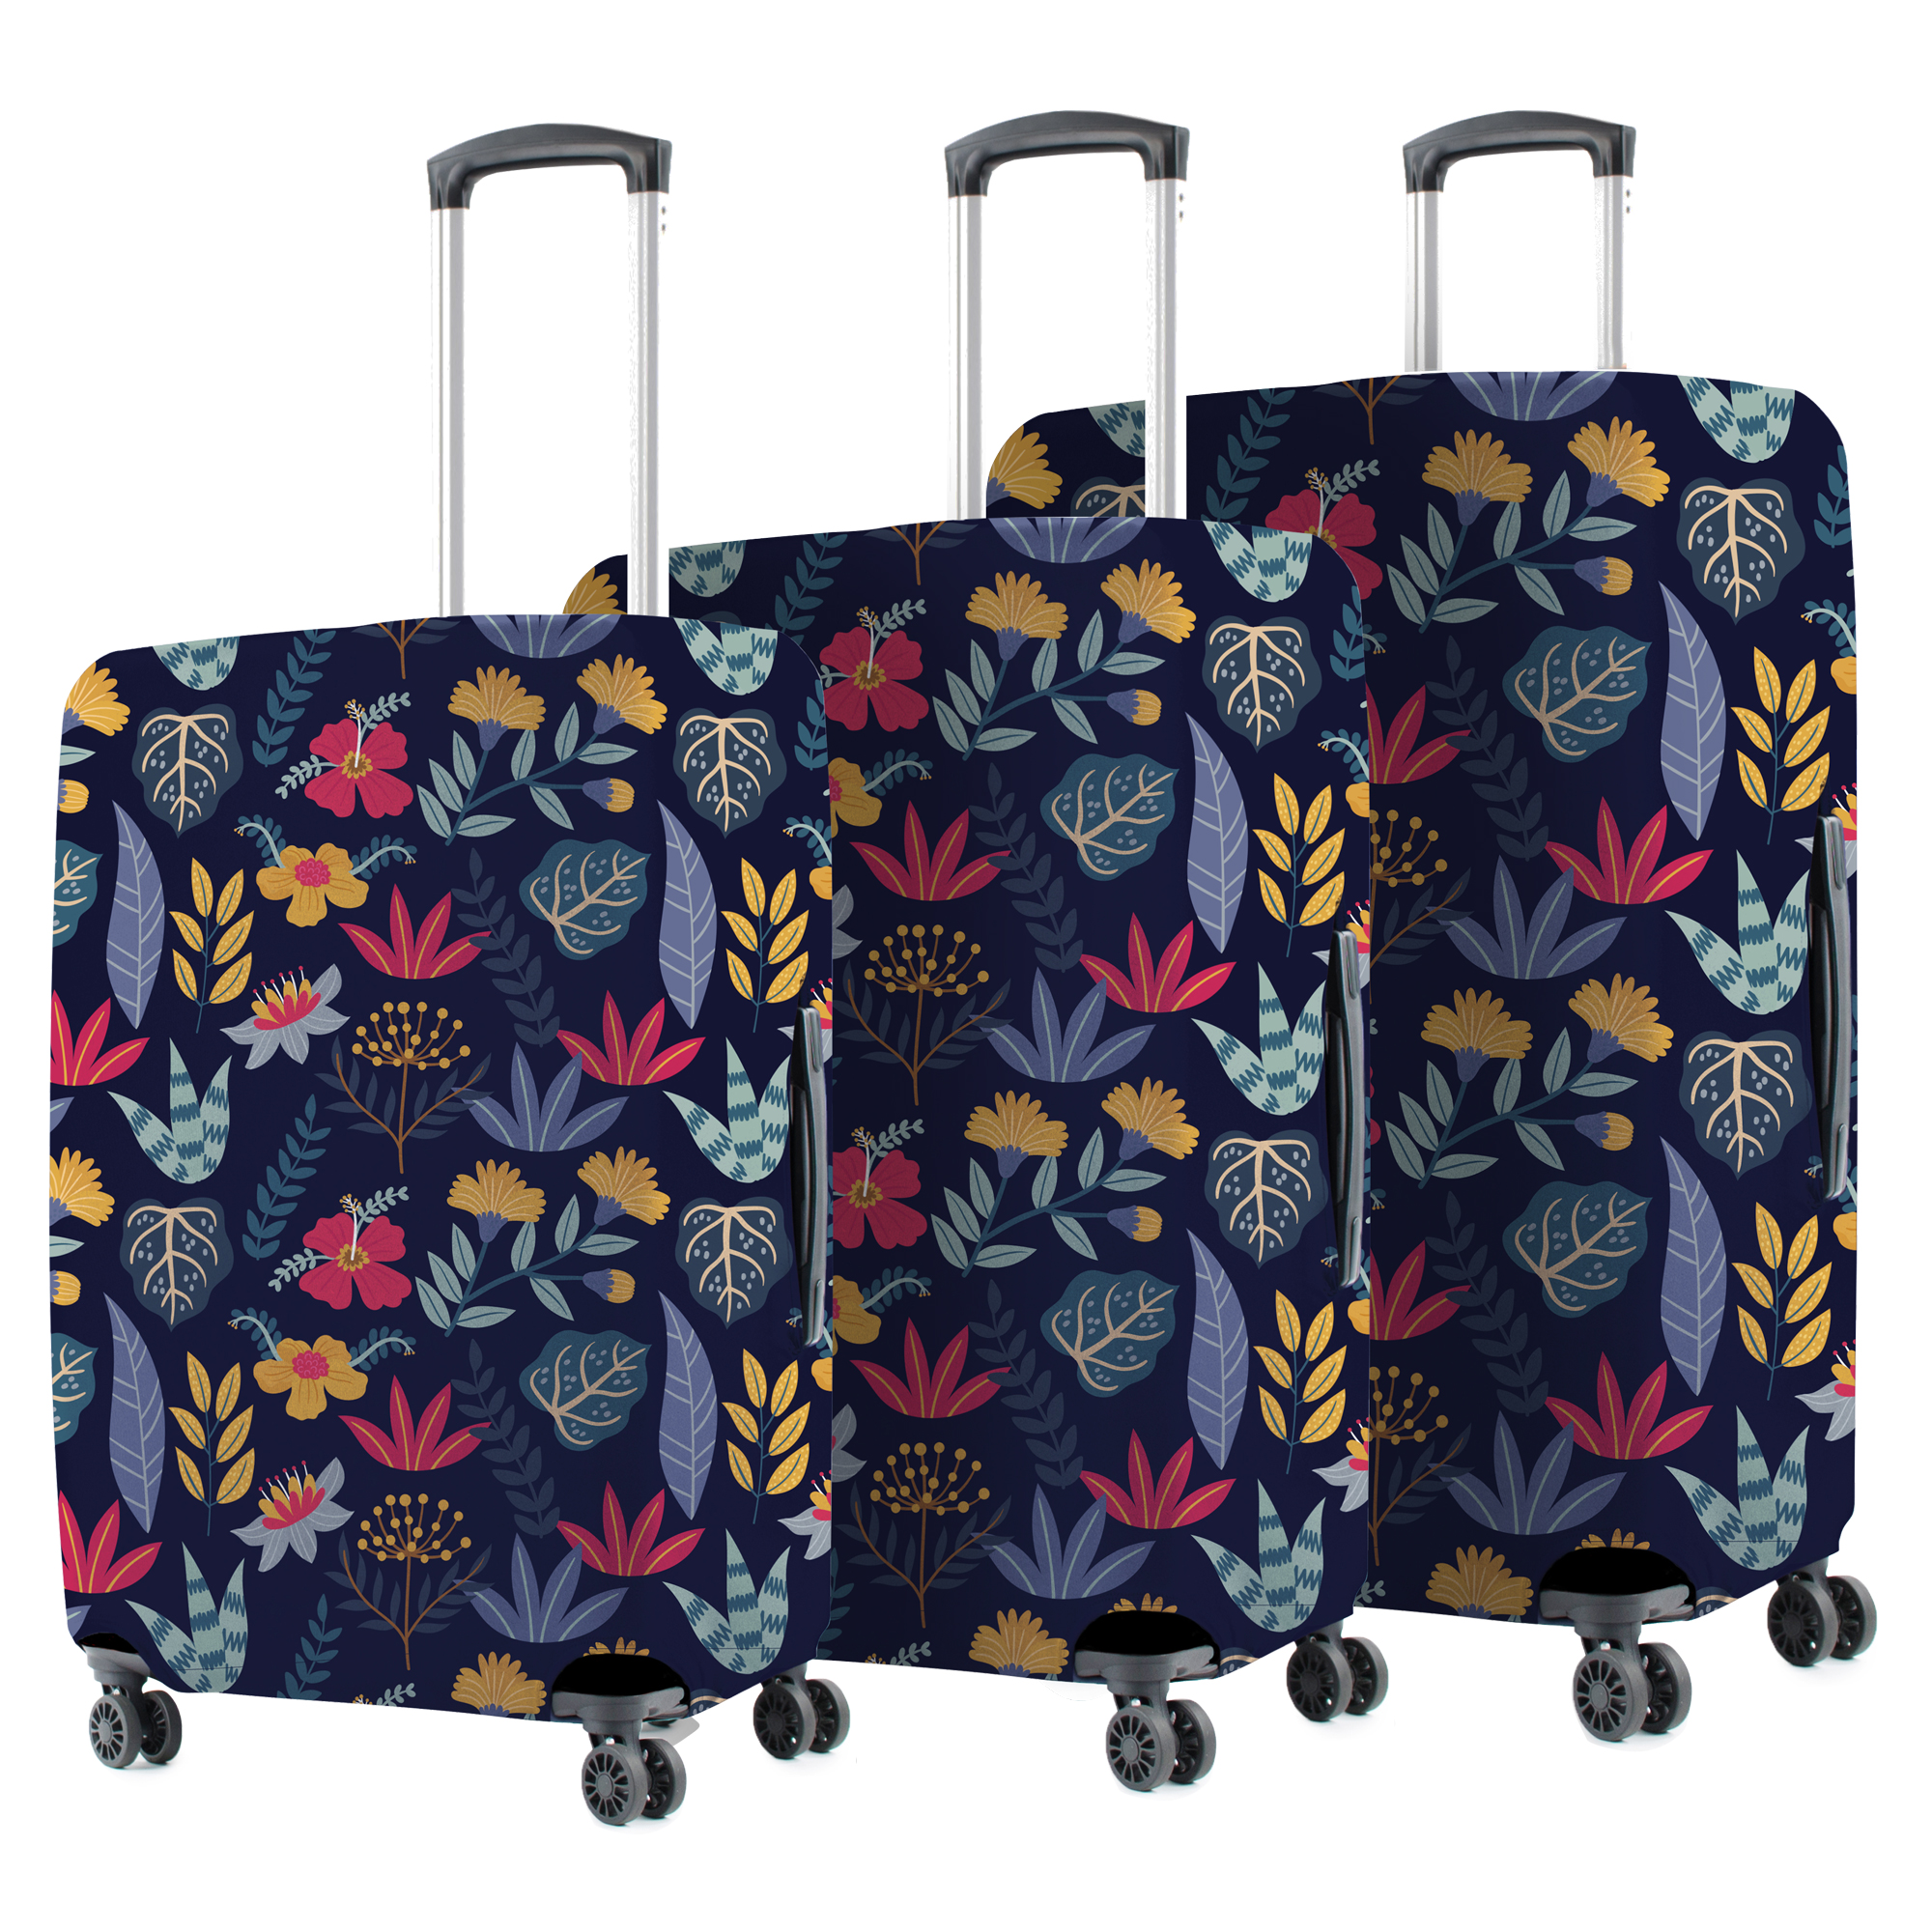 Luggage Cover Floral Design